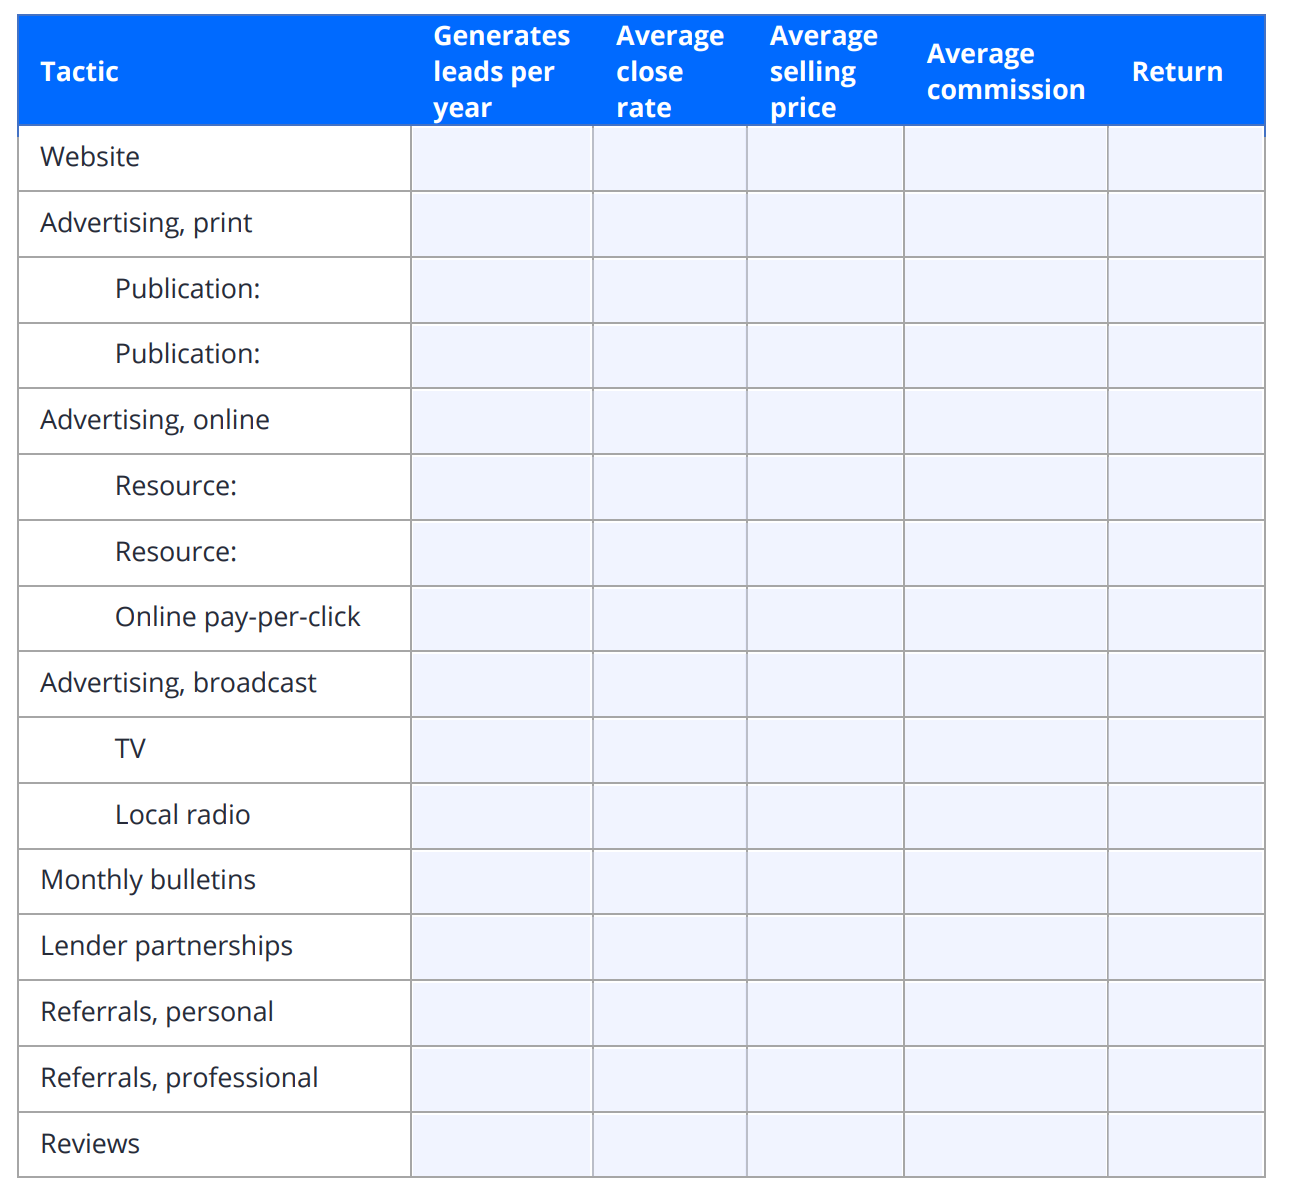 A real estate marketing plan table showing the return on marketing tactics for generating leads.